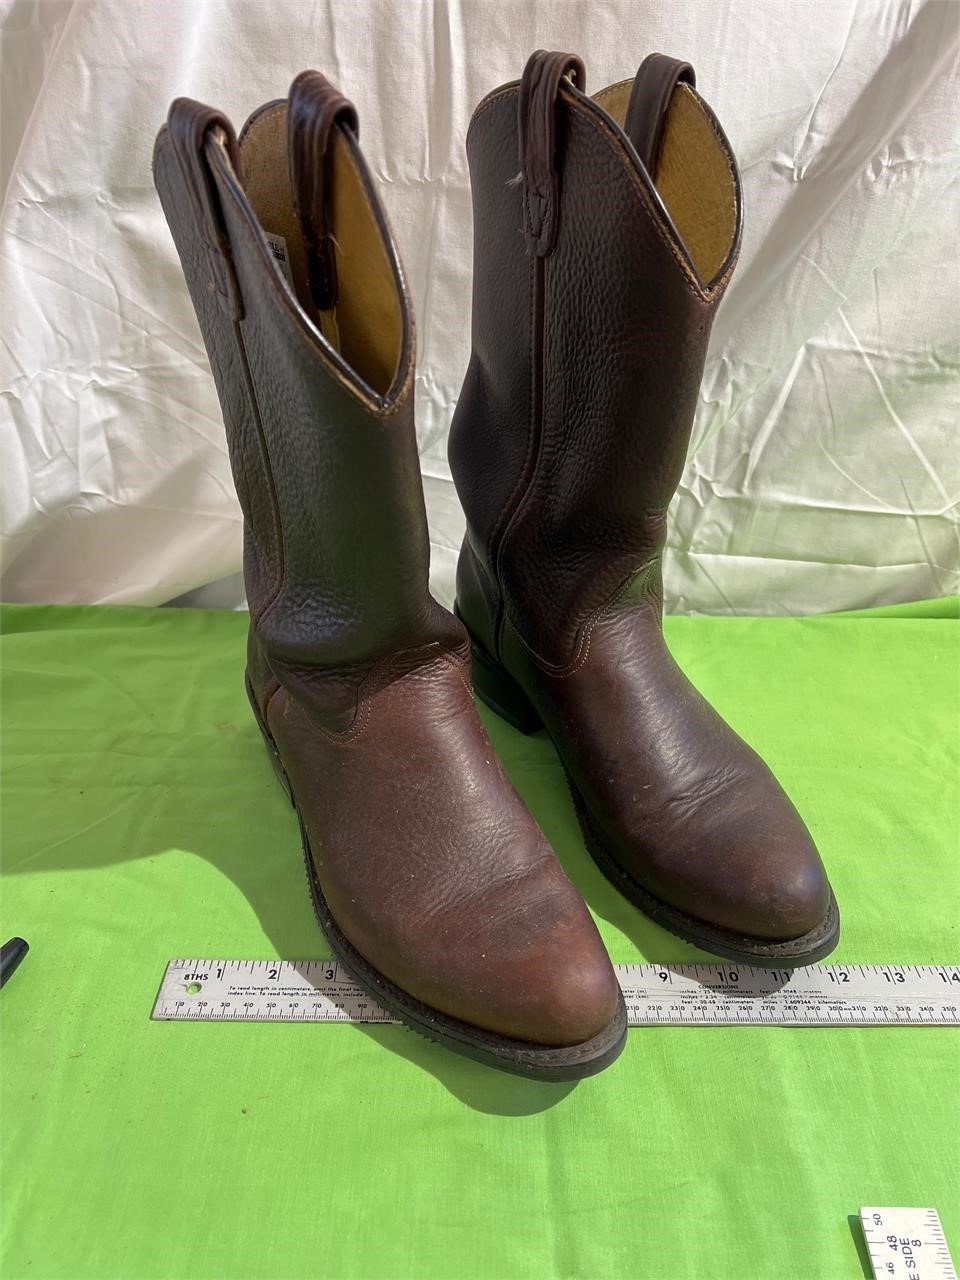 Double H boots size 10 1/2